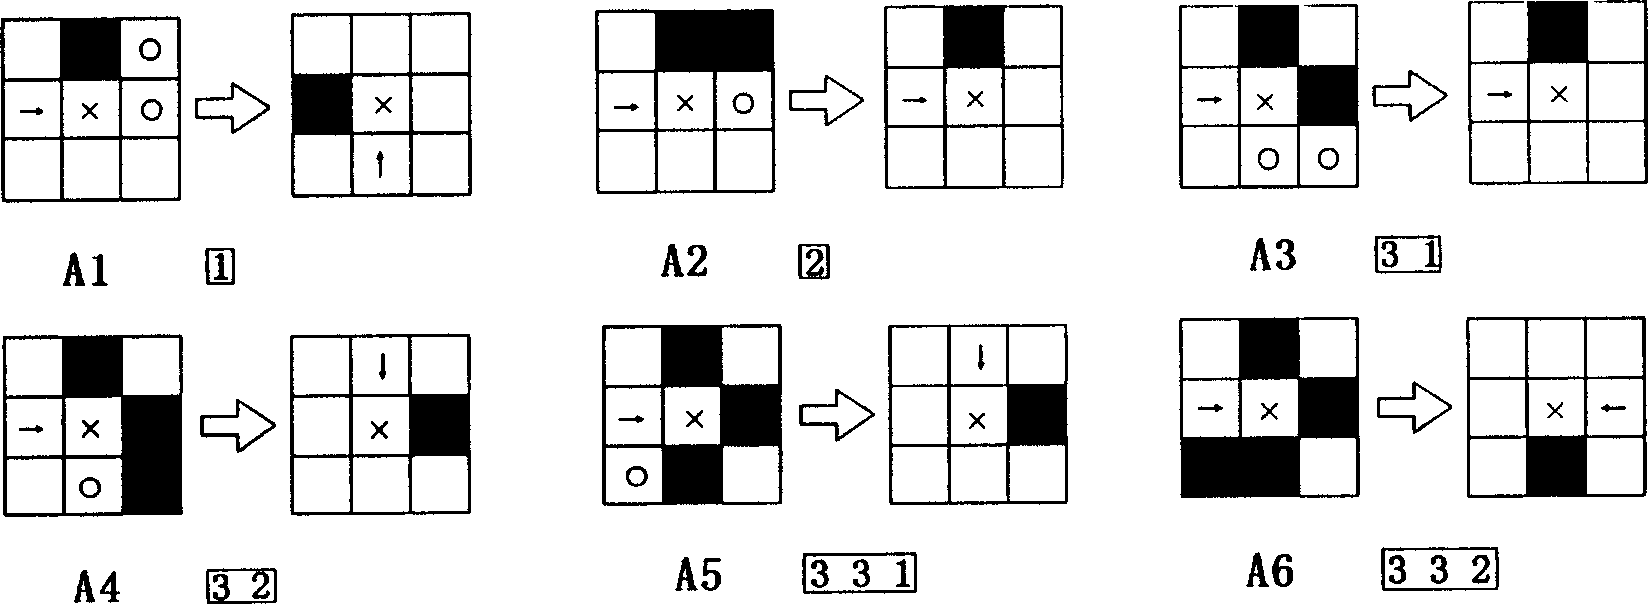 Method for providing format of storing images in high compress performance